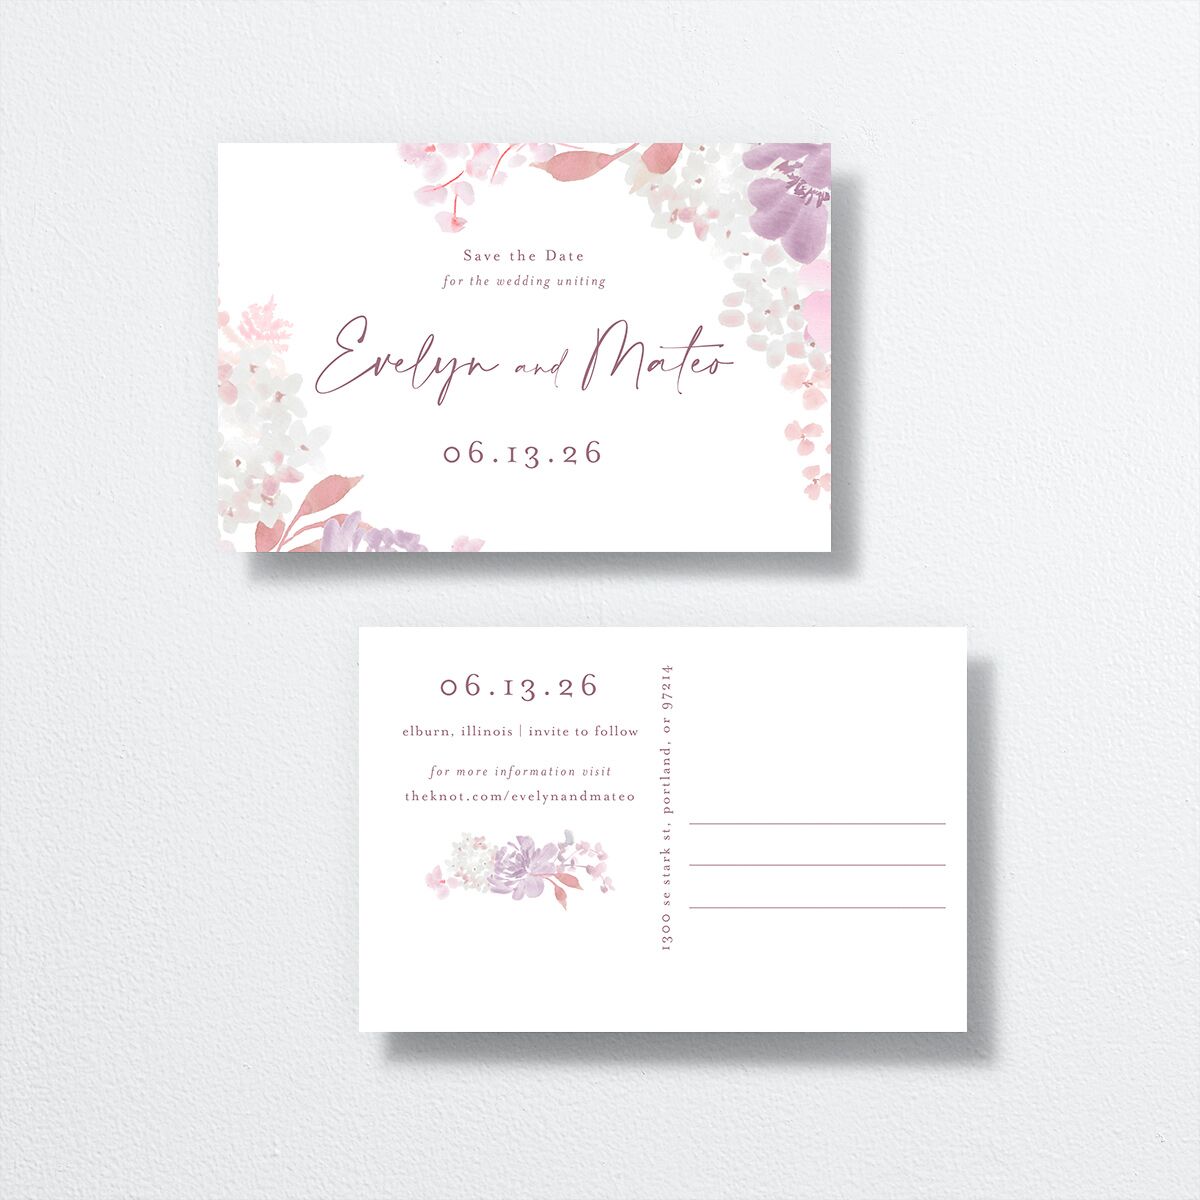 Hydrangea Garden Save The Date Postcards front-and-back